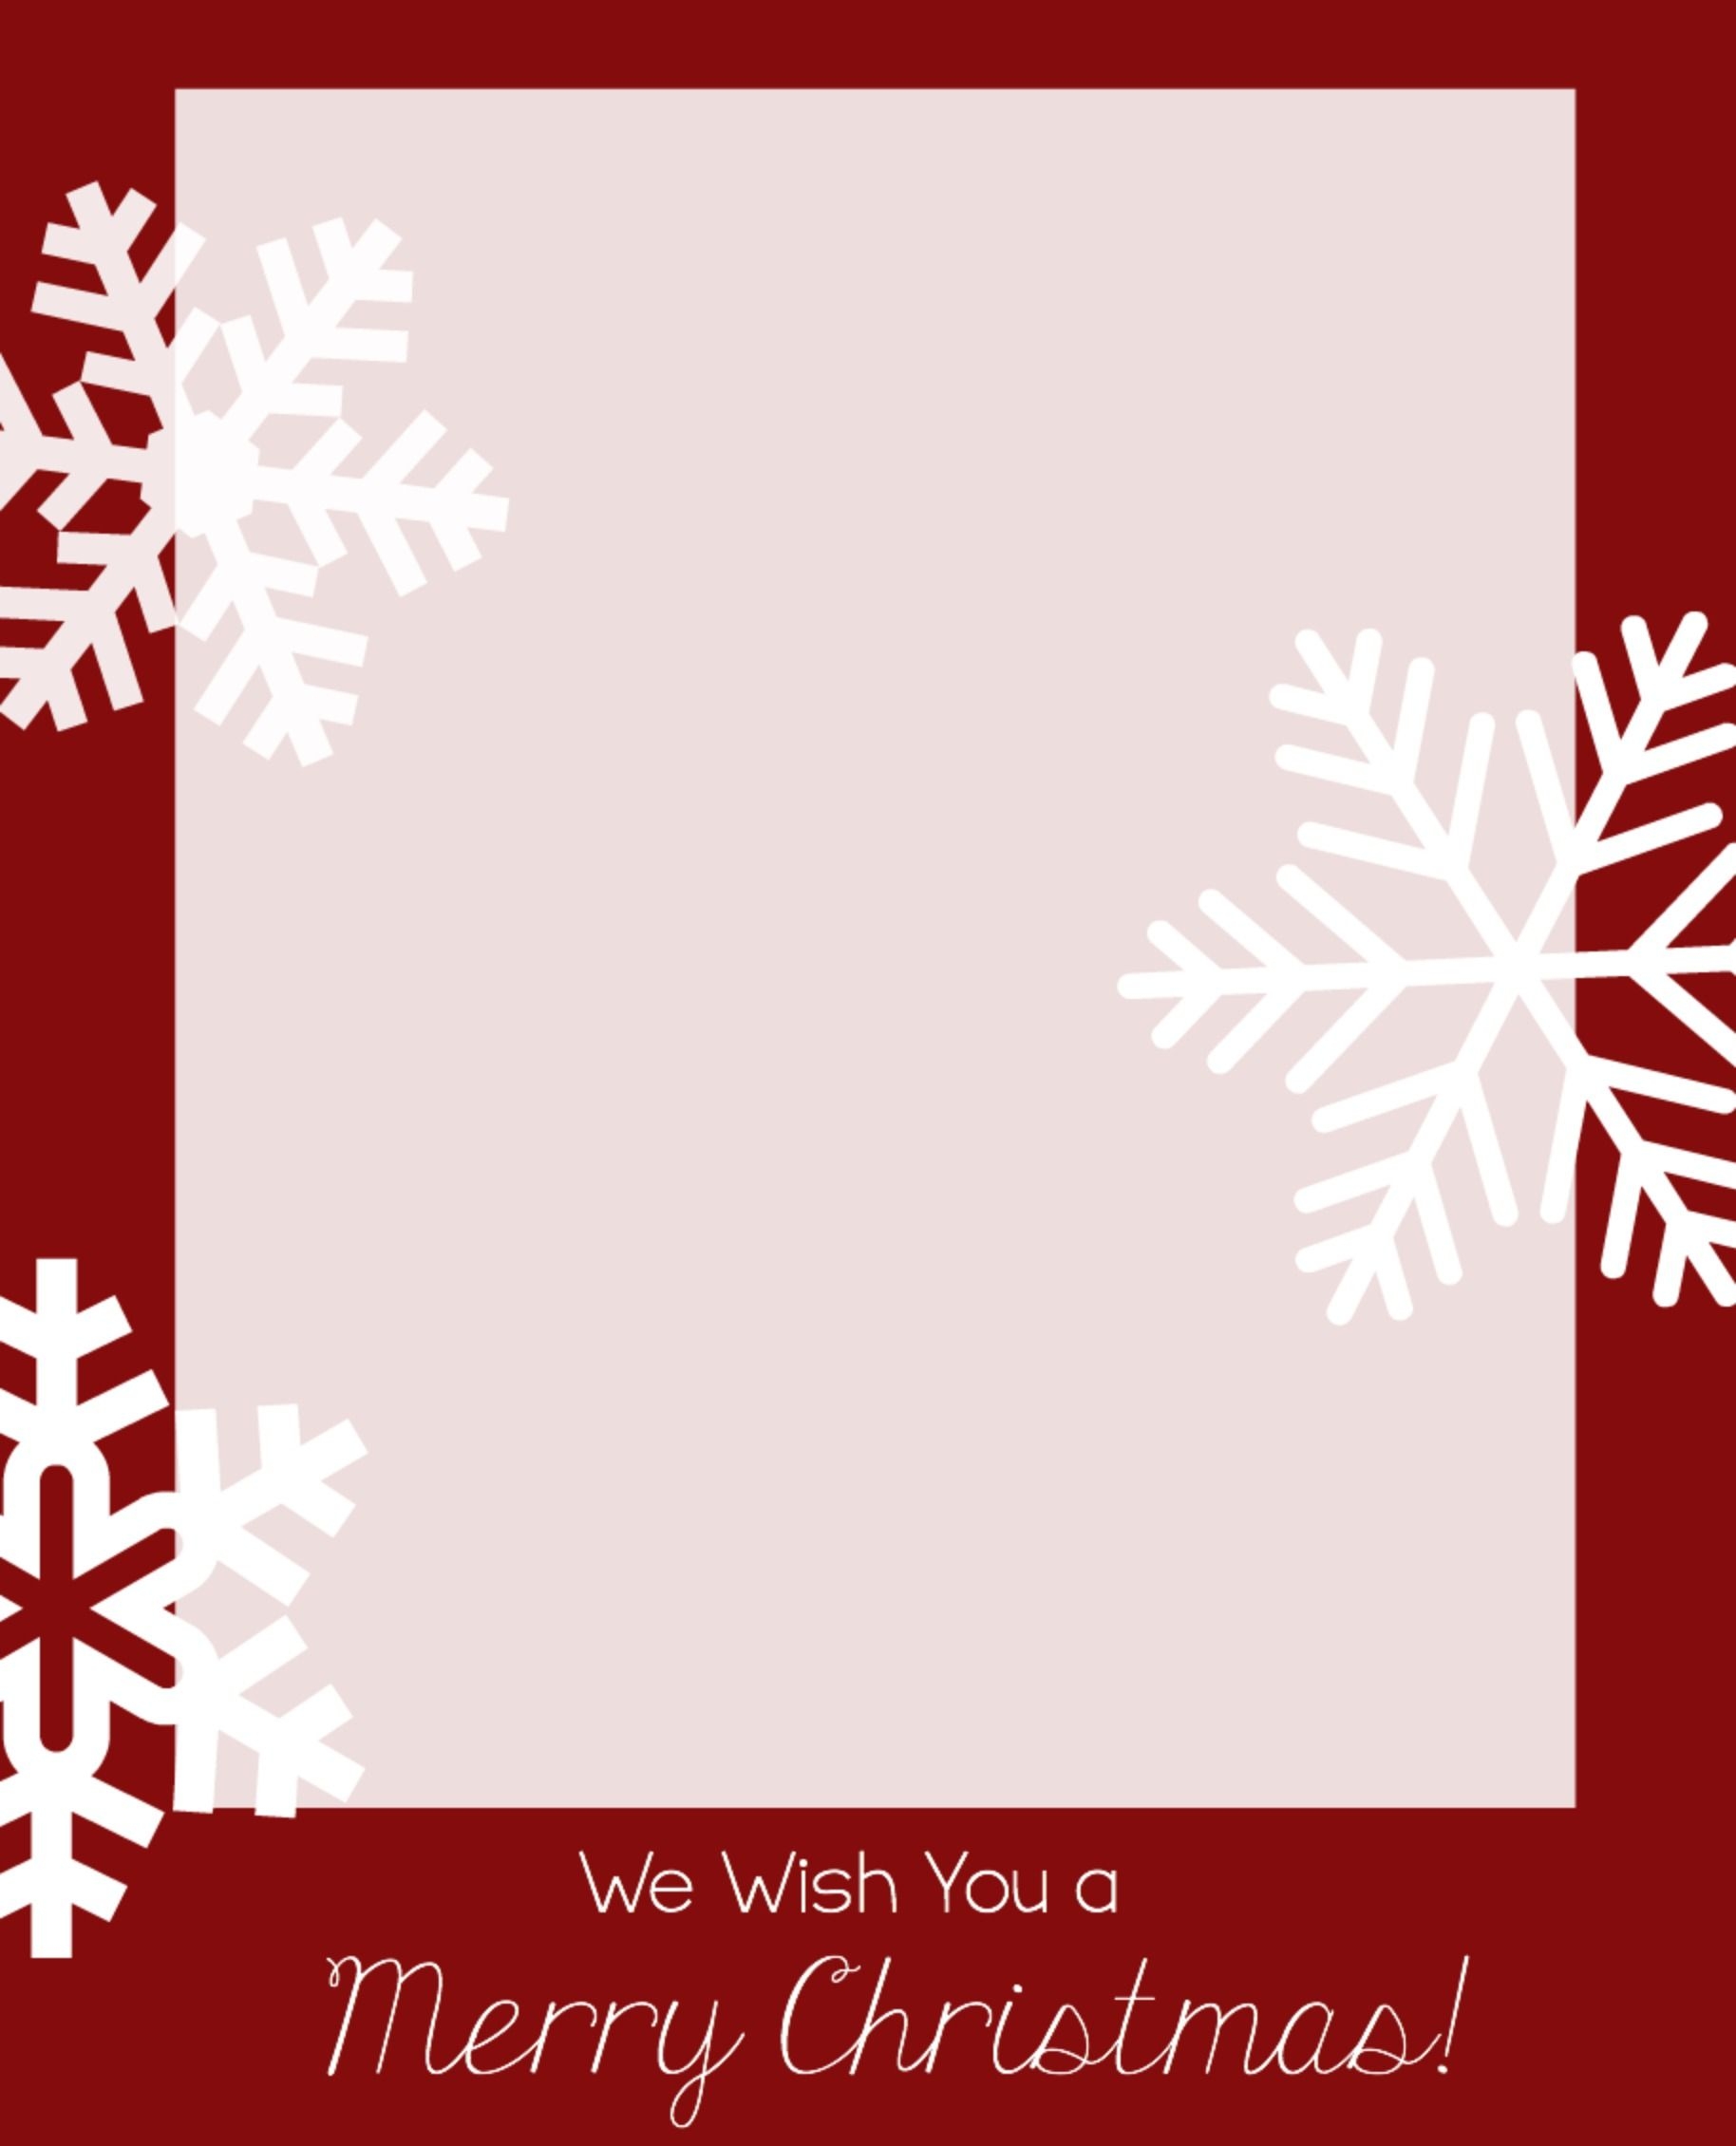 Free Christmas Card Templates Crazy Little Projects Christmas Photo Card Template Christmas Templates Free Christmas Card Templates Free - Free Printable Christmas Card Templates